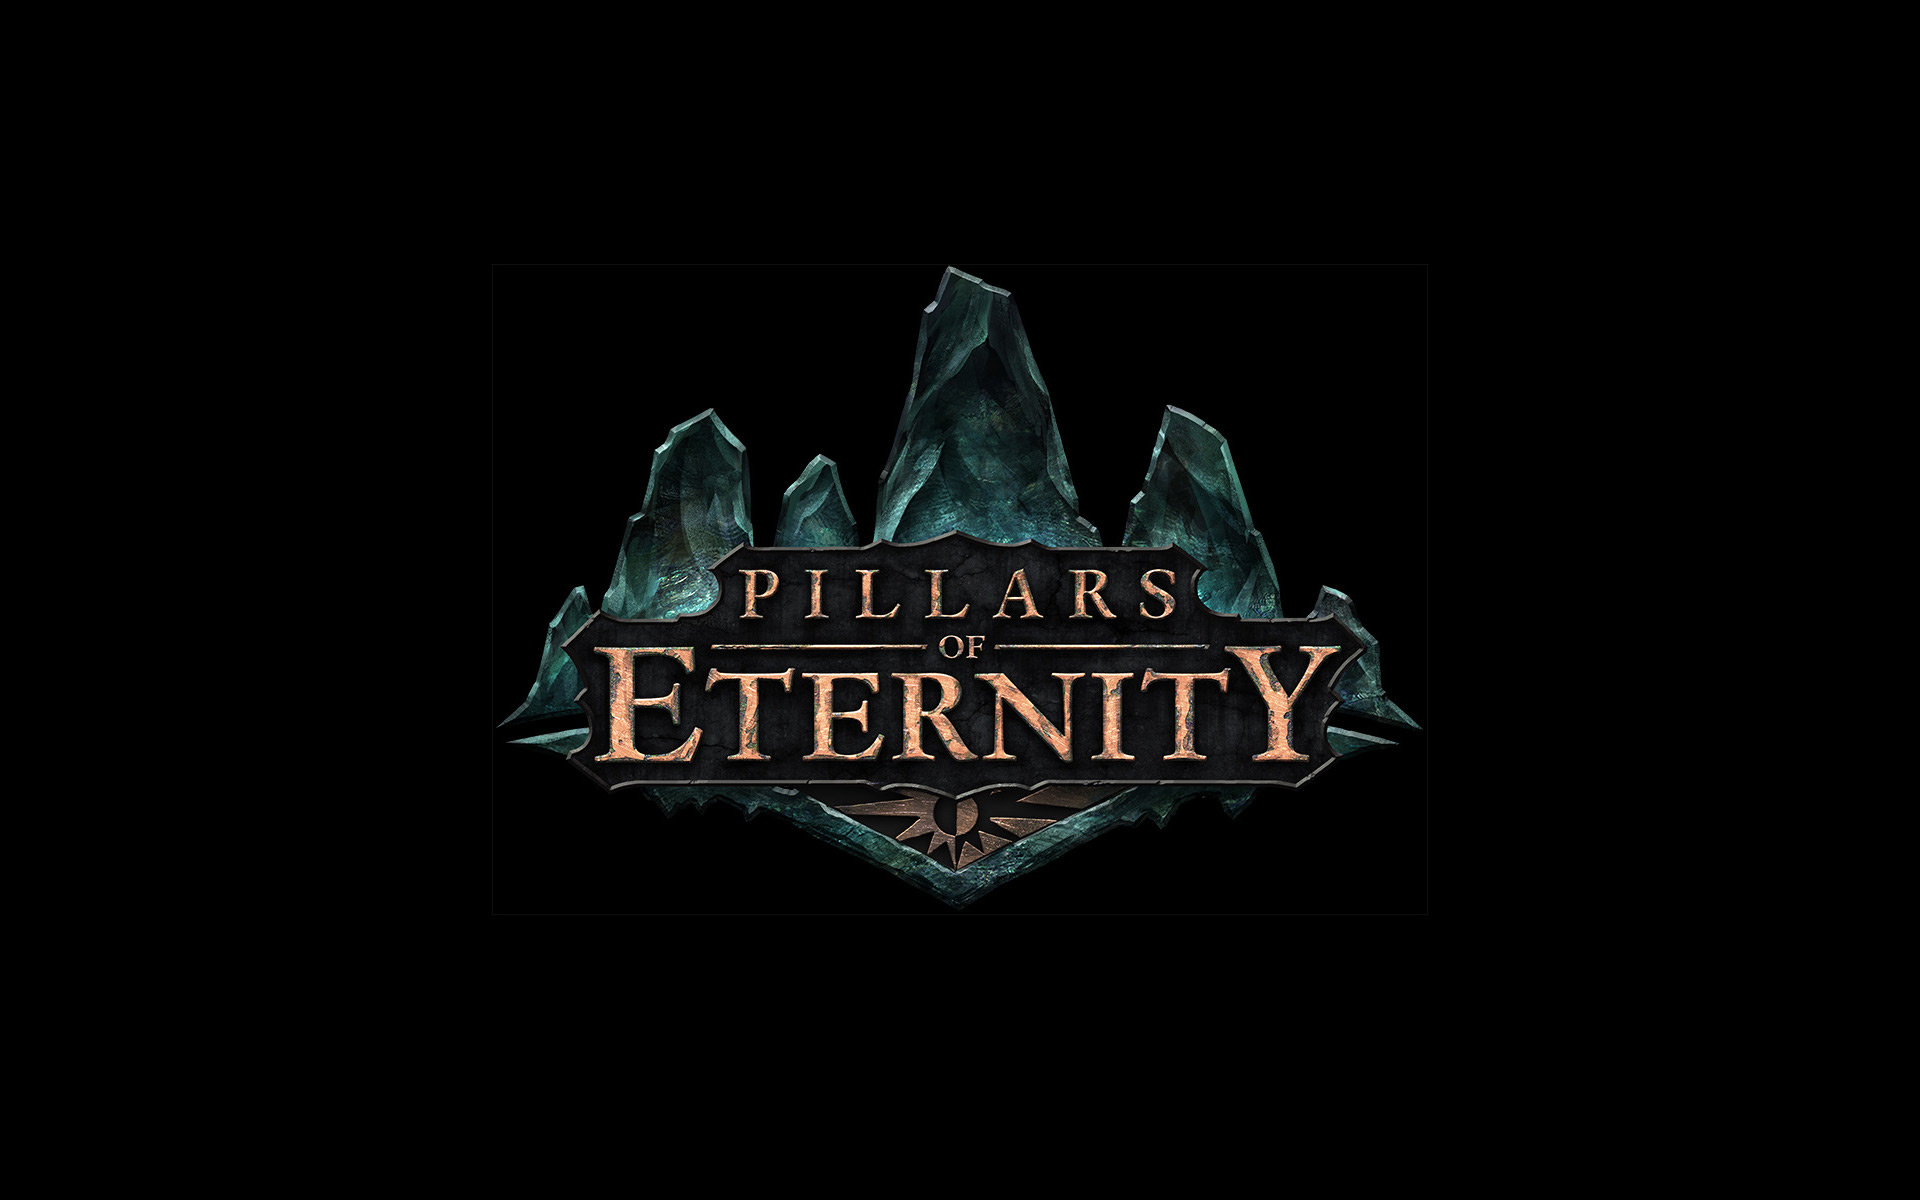 Pillars of Eternity is an RPG that was funded on Kickstarter and is going to be released soon.